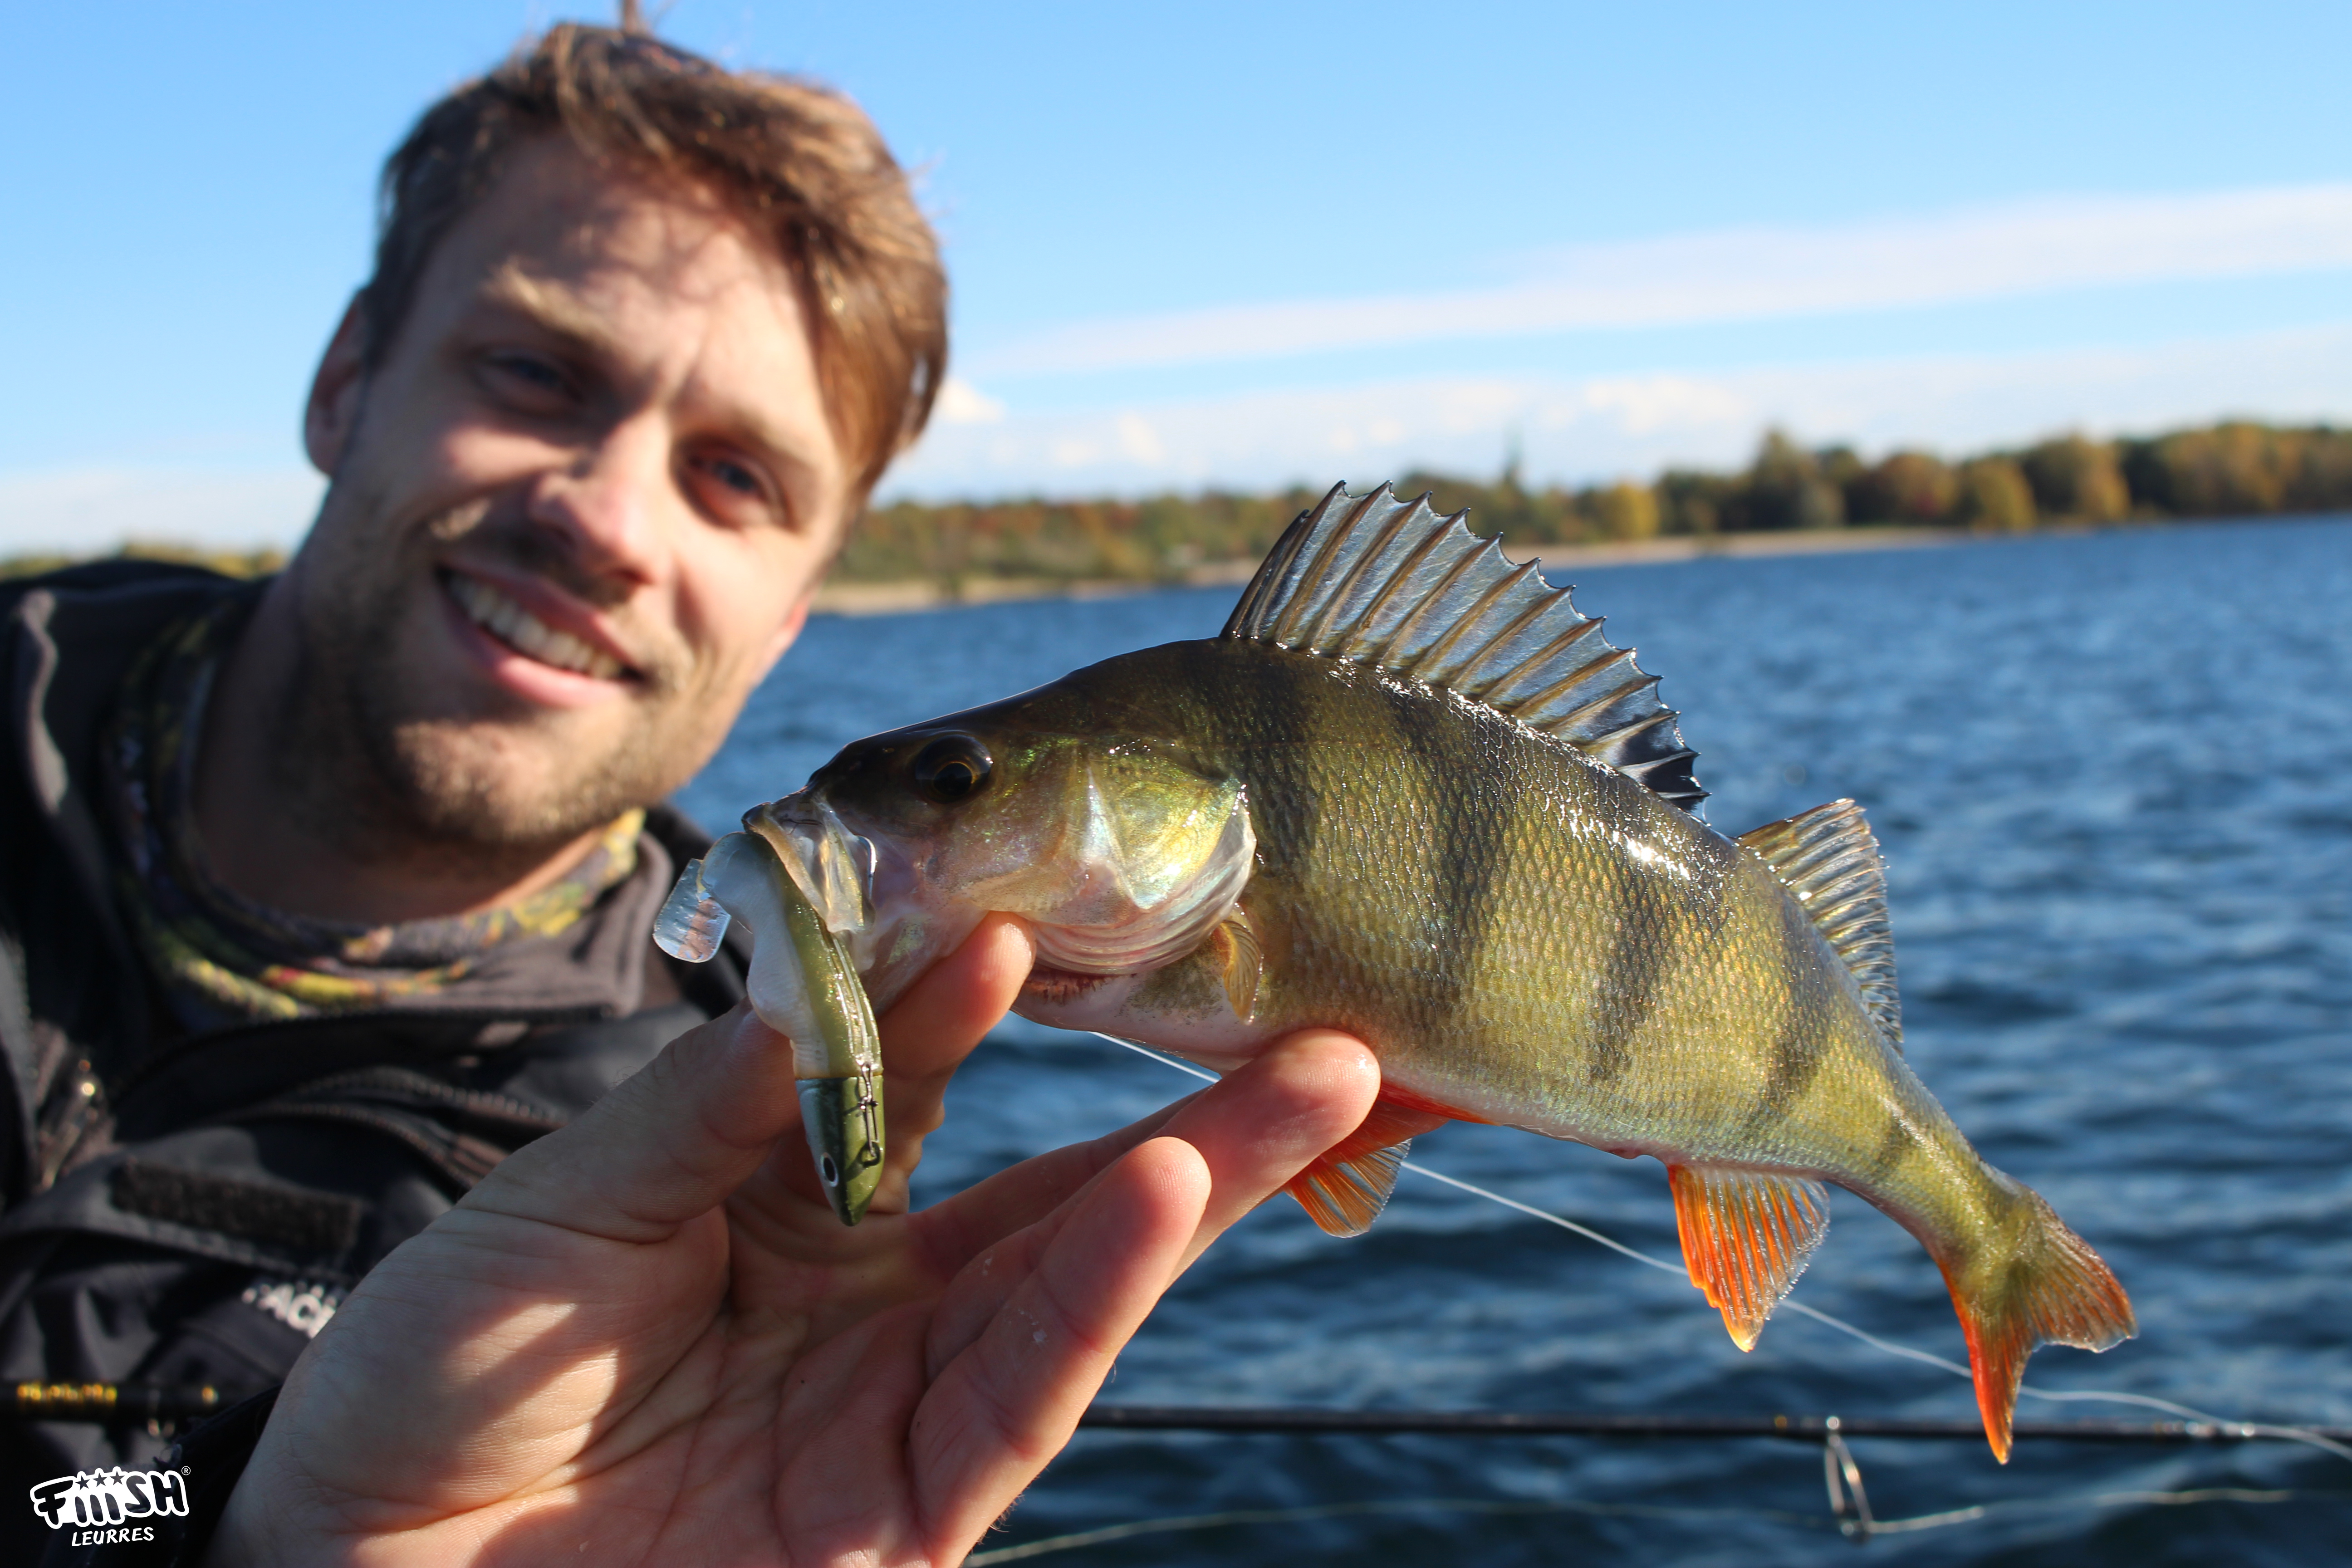 Marvin / Perch inferno : How to maximized our catches, Fiiish